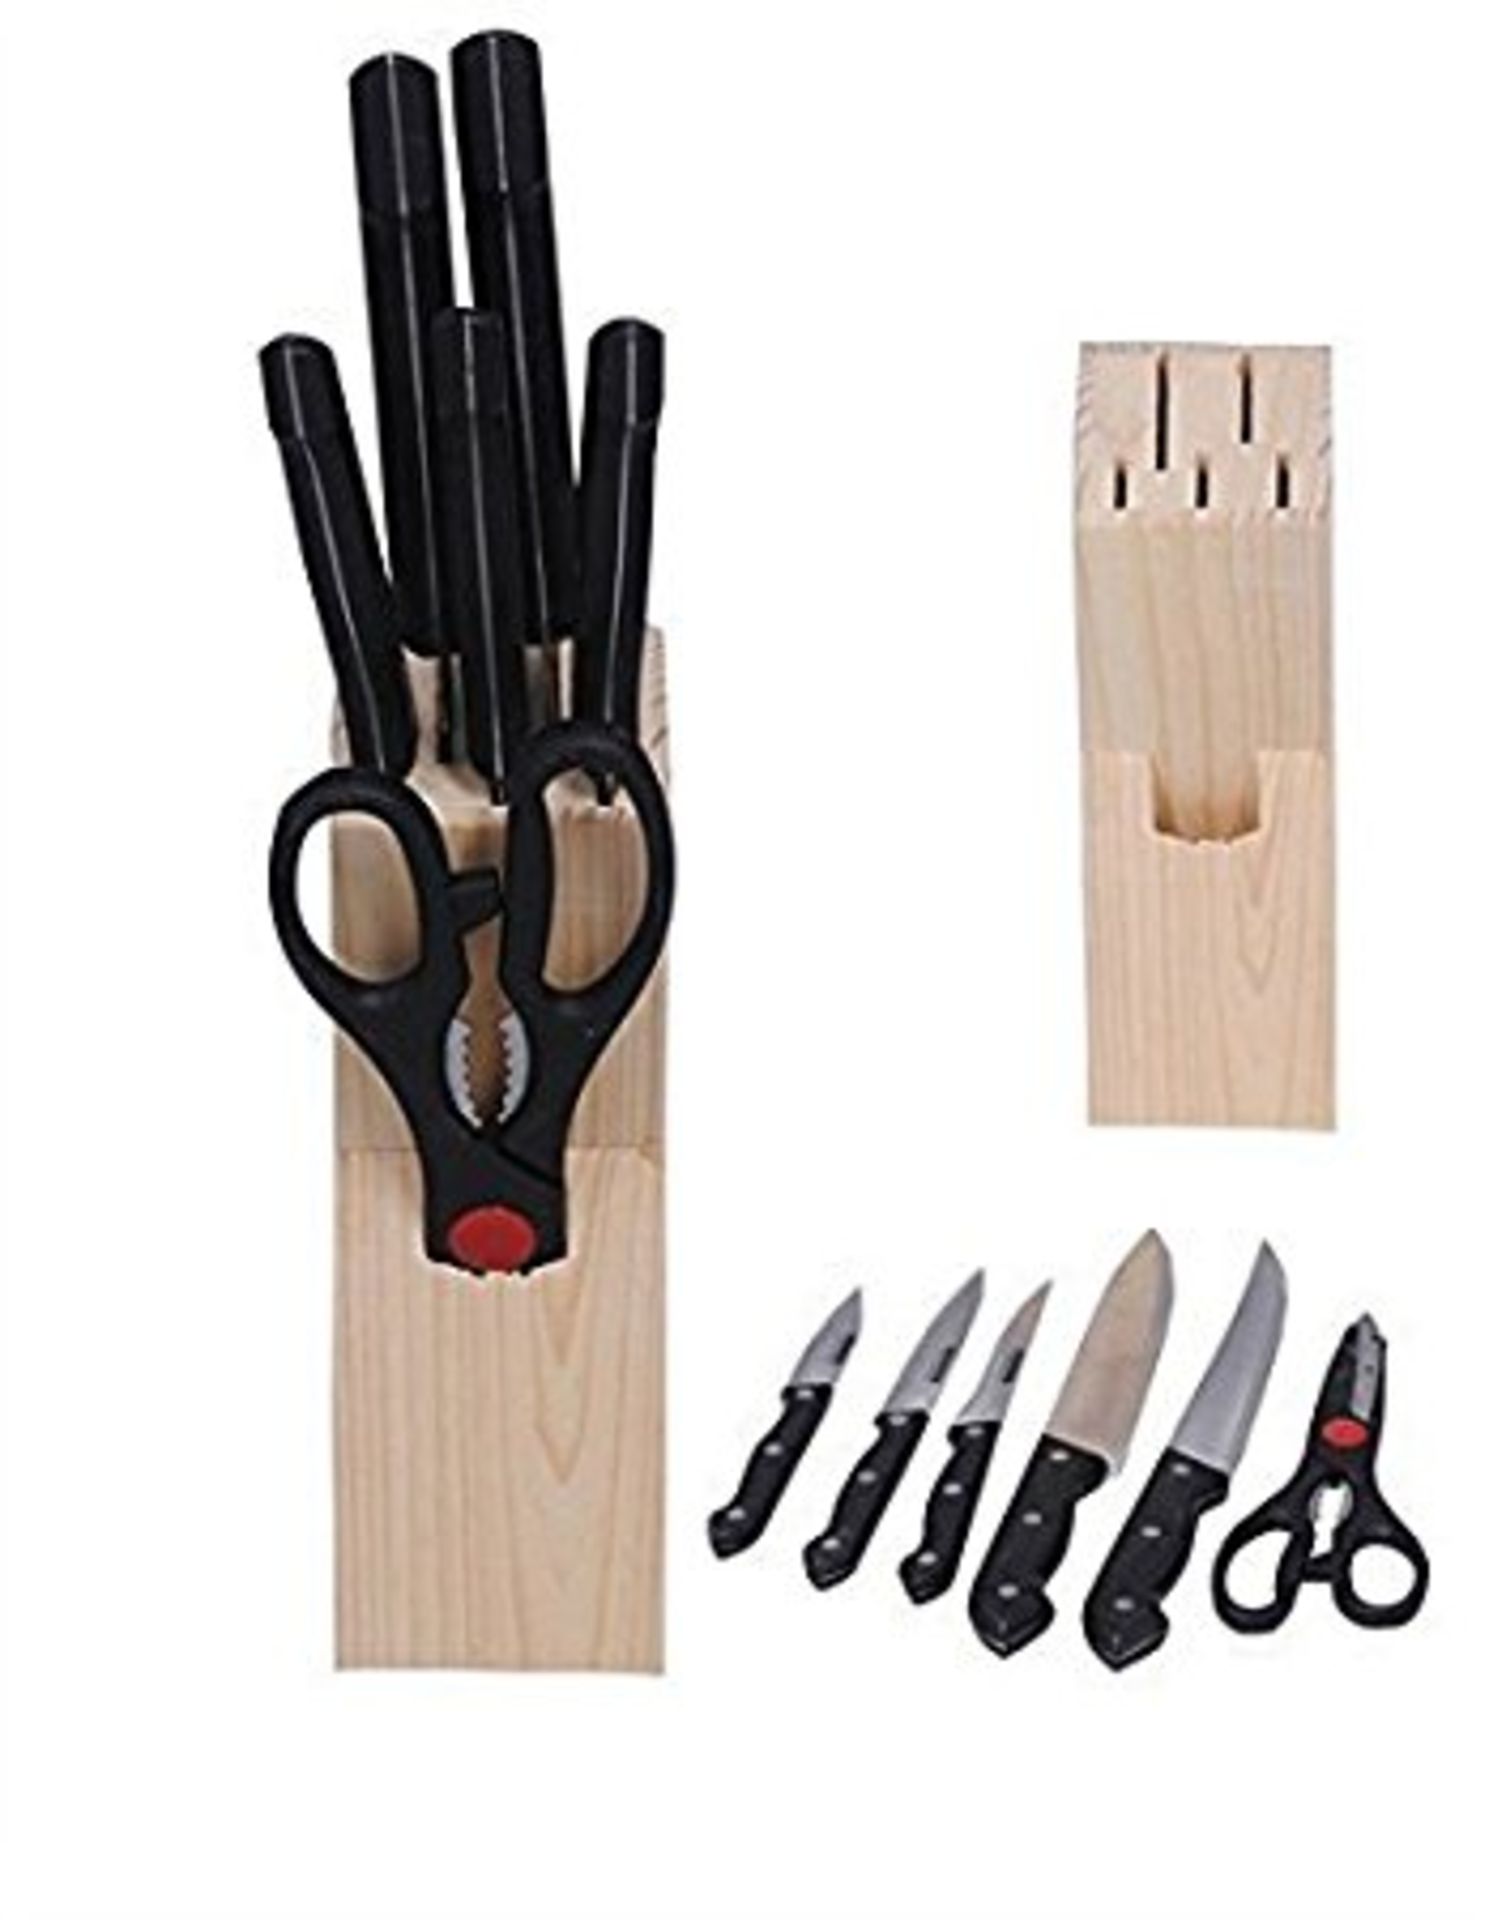 V *TRADE QTY* Brand New 7 Piece Stainless Steel Knife Set With Wooden Block - Includes - Paring